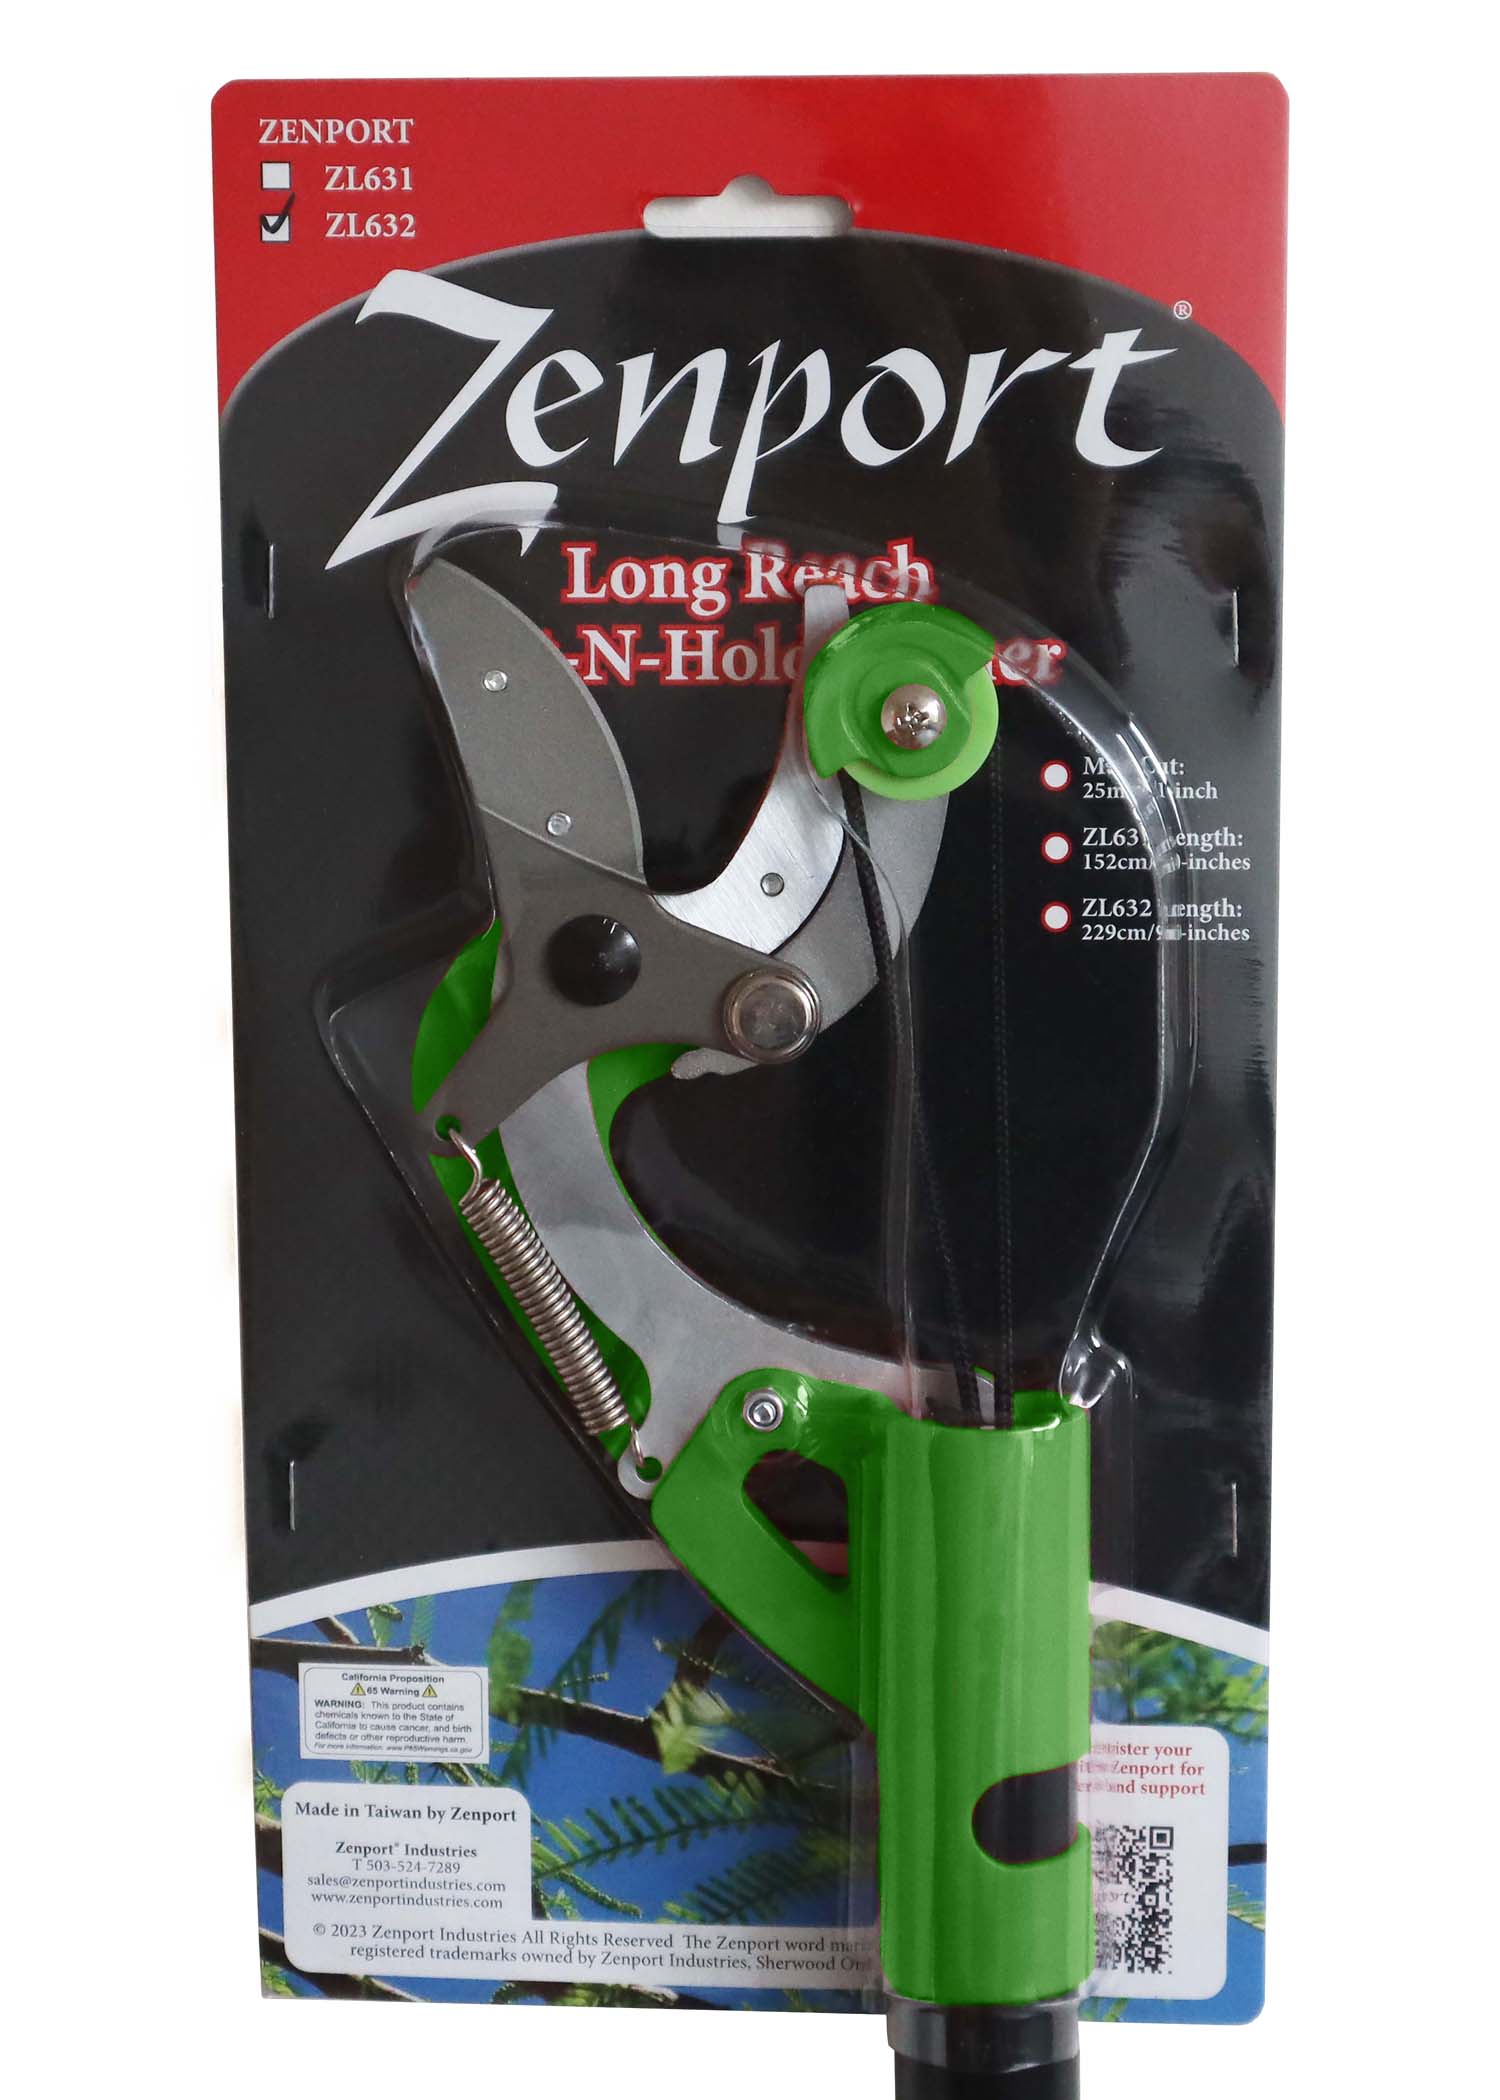 Zenport Pole Pruner ZL632 90-Inch, .5-Inch Cut, Cut-N-Hold, Pump-Action, Draw-Cord, For Pruning Fruit Trees - Click Image to Close